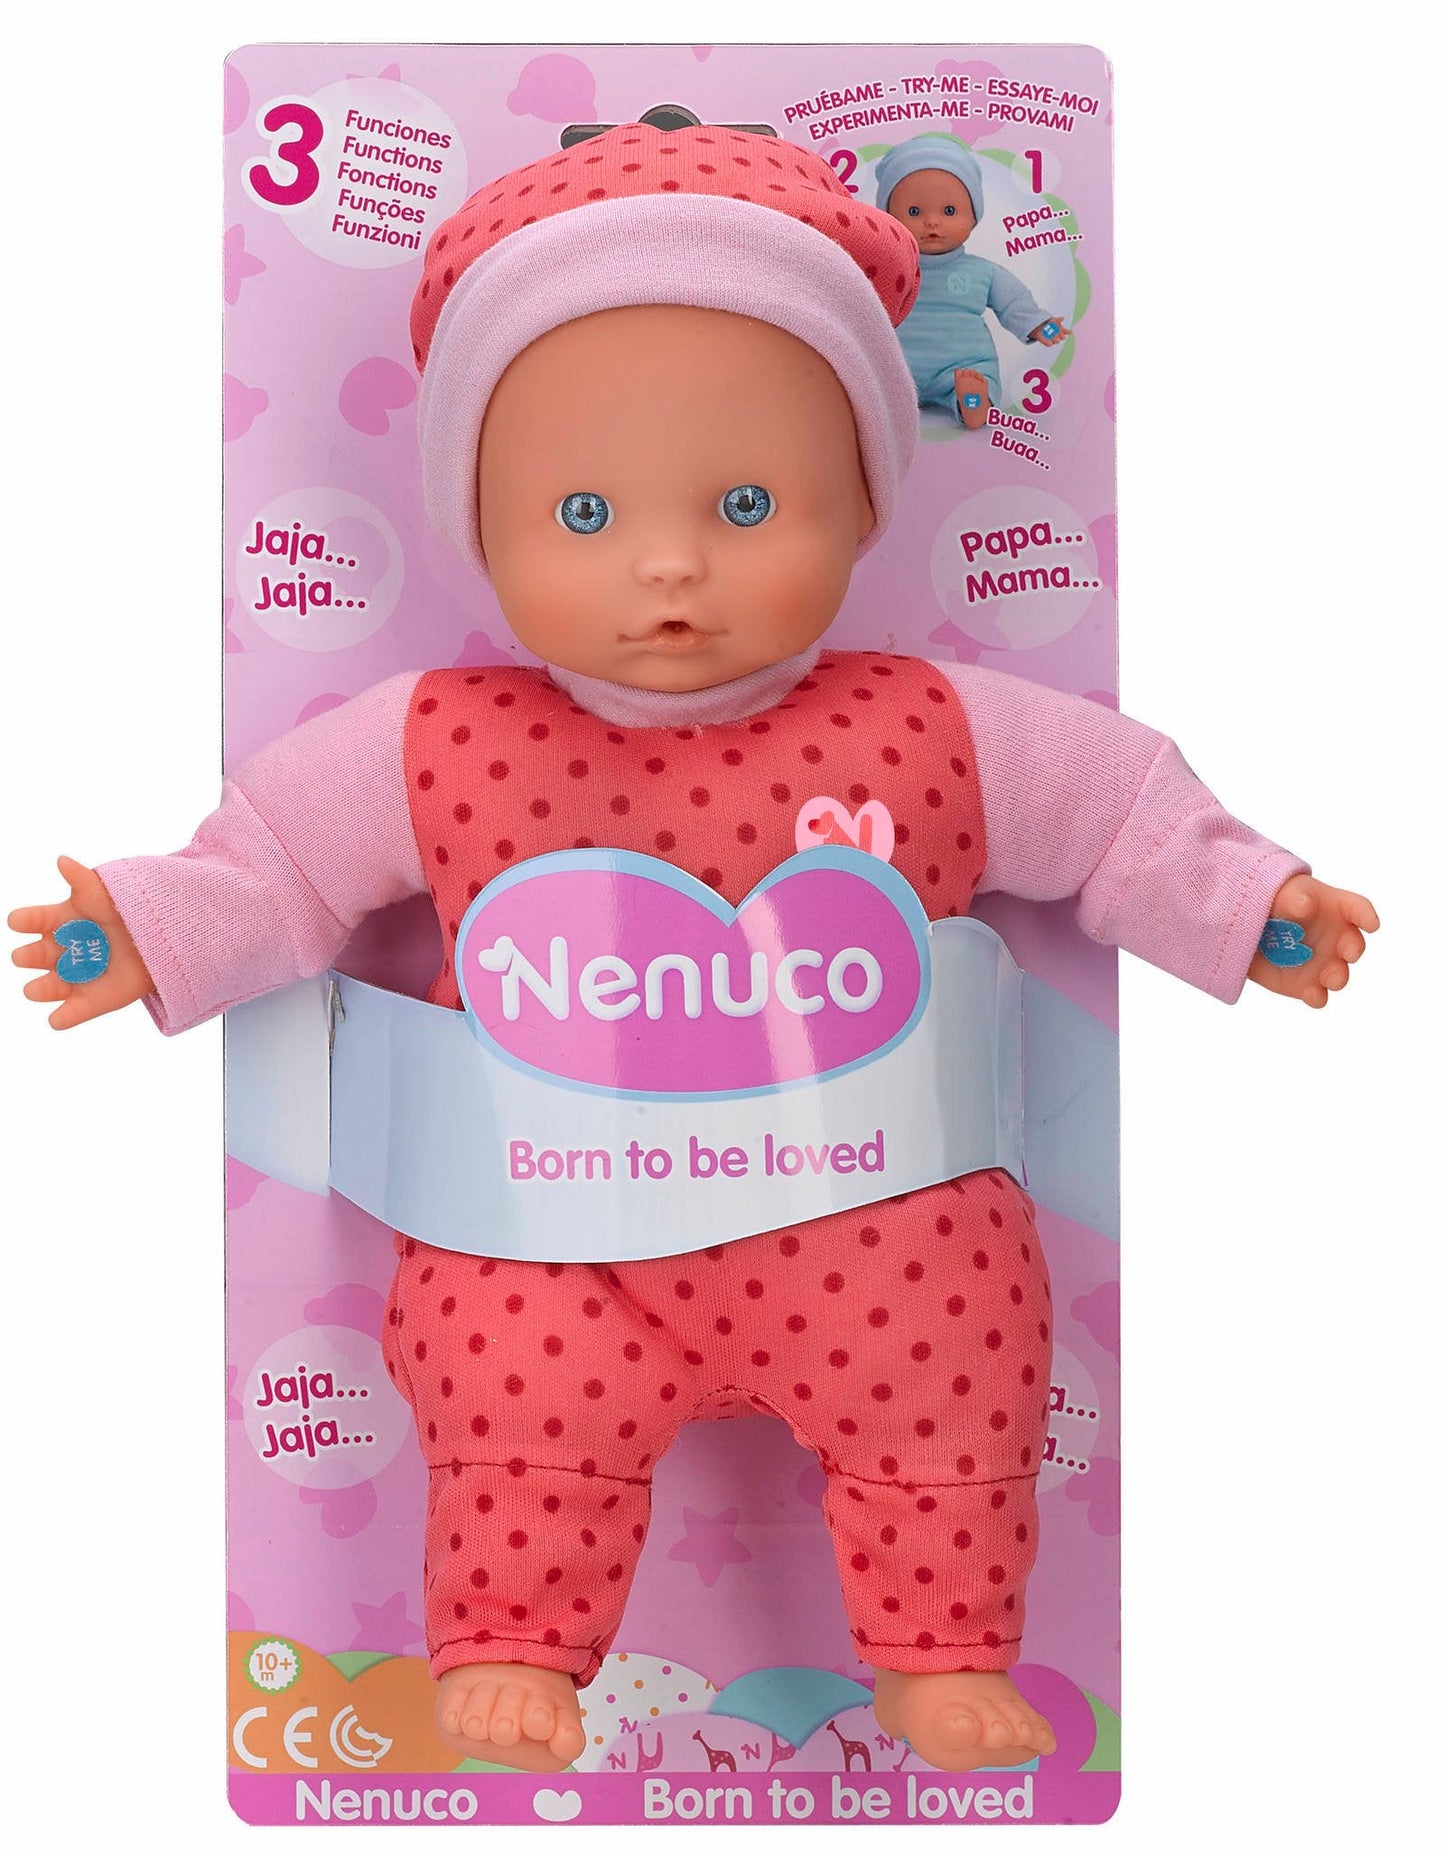 virar Minúsculo Barriga Nenuco Soft Baby Doll with 3 Real Life Roles, Colorful Outfits, 23.6" –  Five K Ltd.